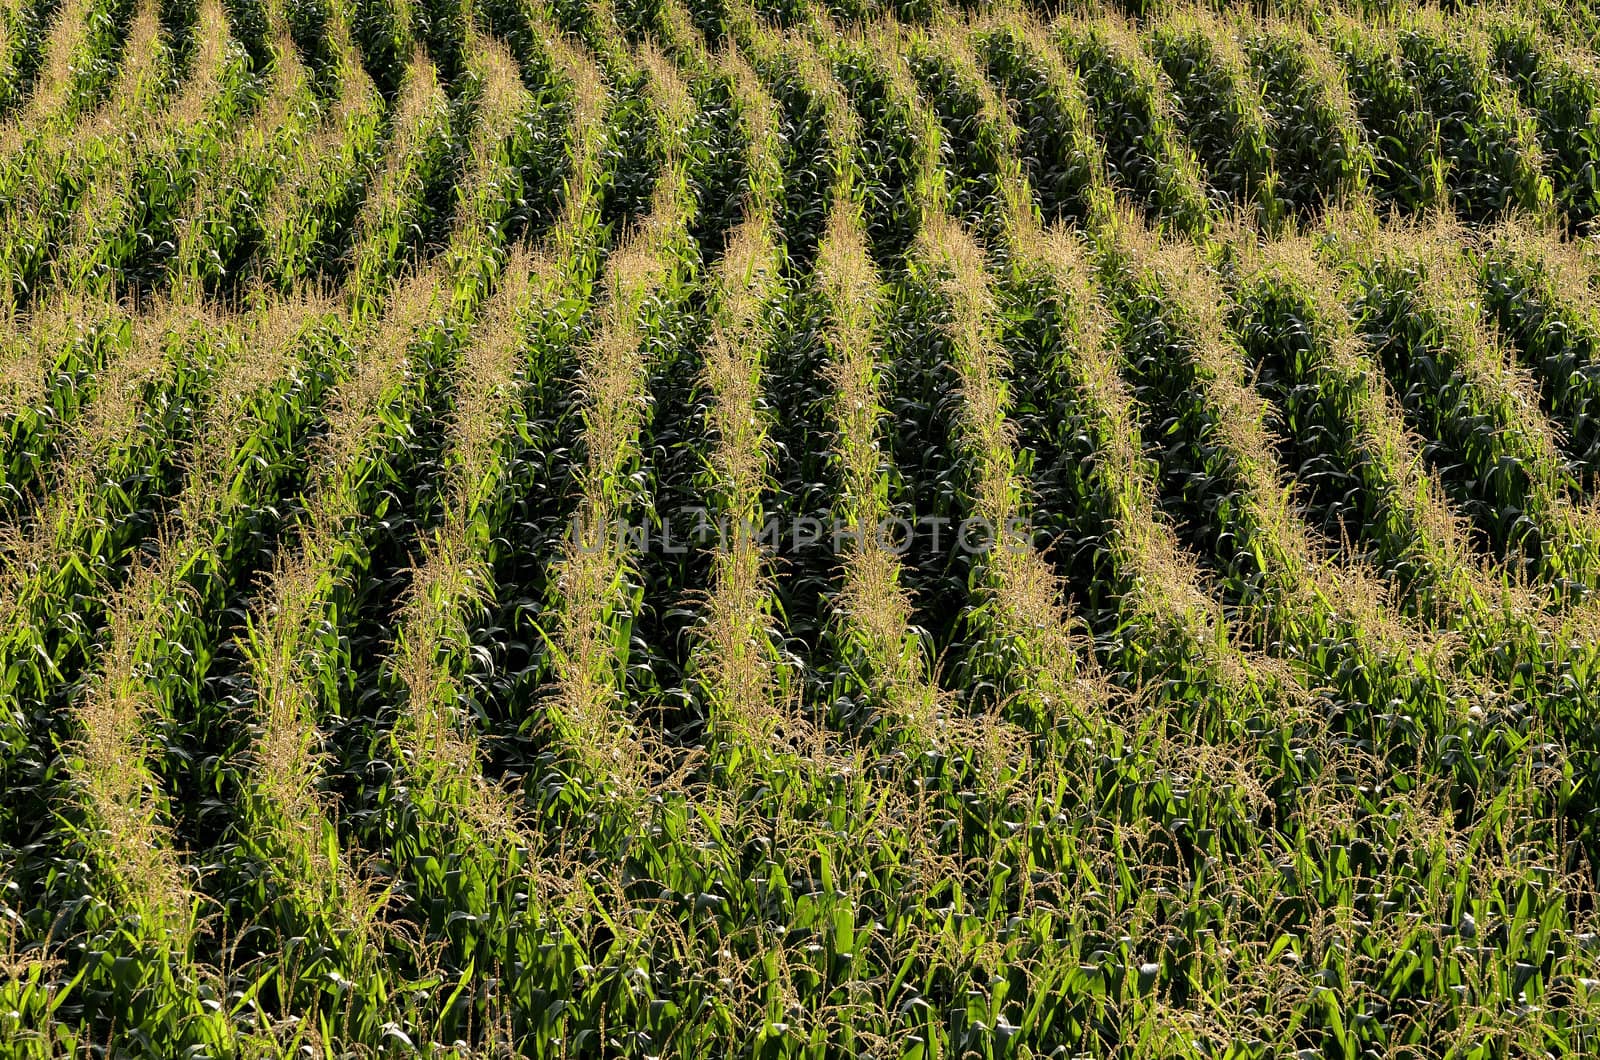 Parallel rows of corn ripening in the field by PRSchreyner